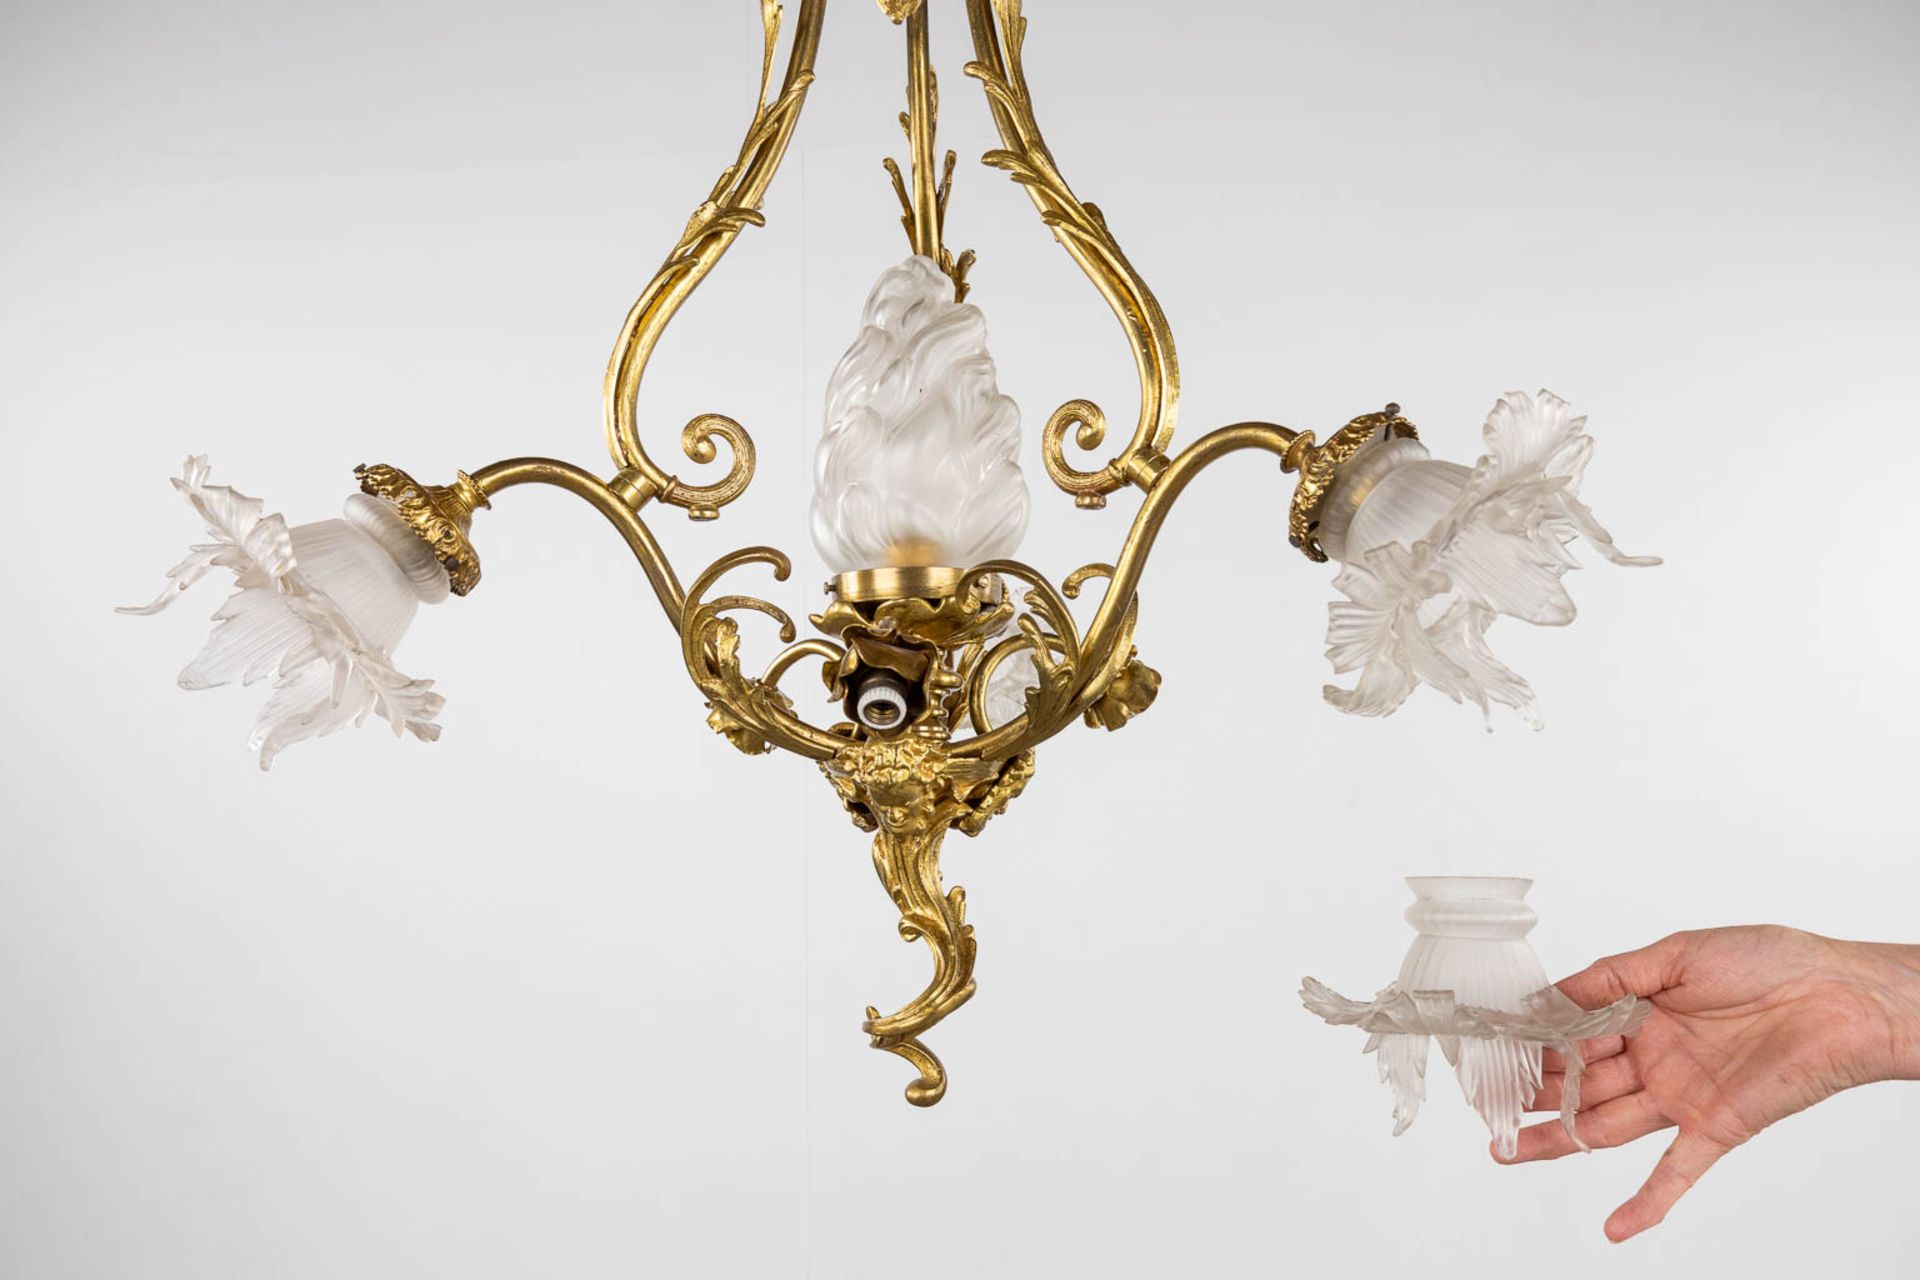 A chandelier, bronze with glass shades and a flambeau, decorated with Satyr figurines. (H:88 x D:54 - Image 12 of 13